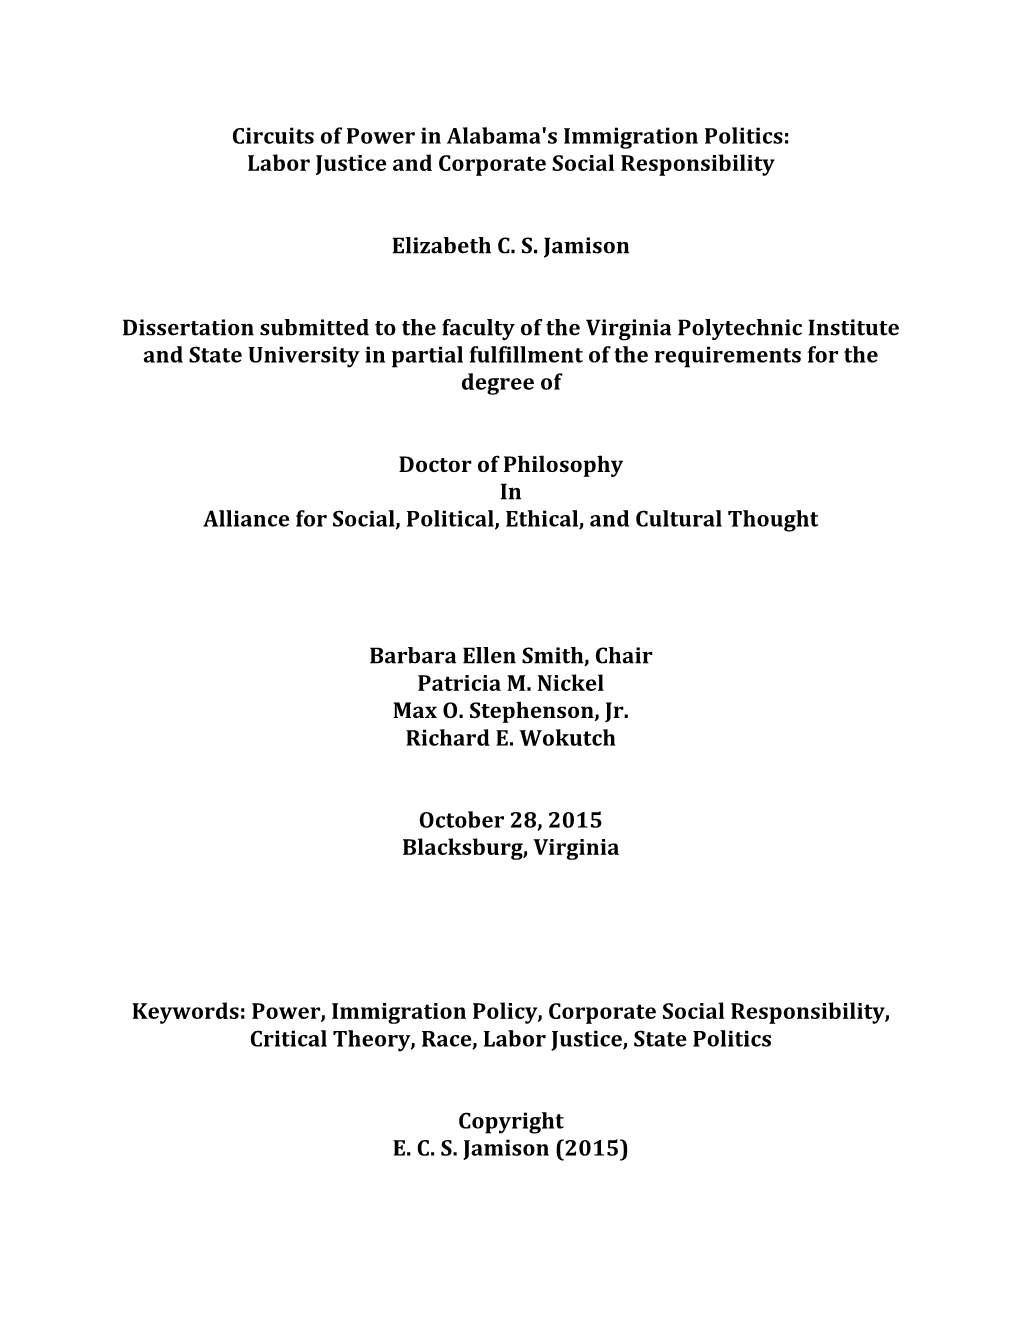 Circuits of Power in Alabama's Immigration Politics: Labor Justice and Corporate Social Responsibility